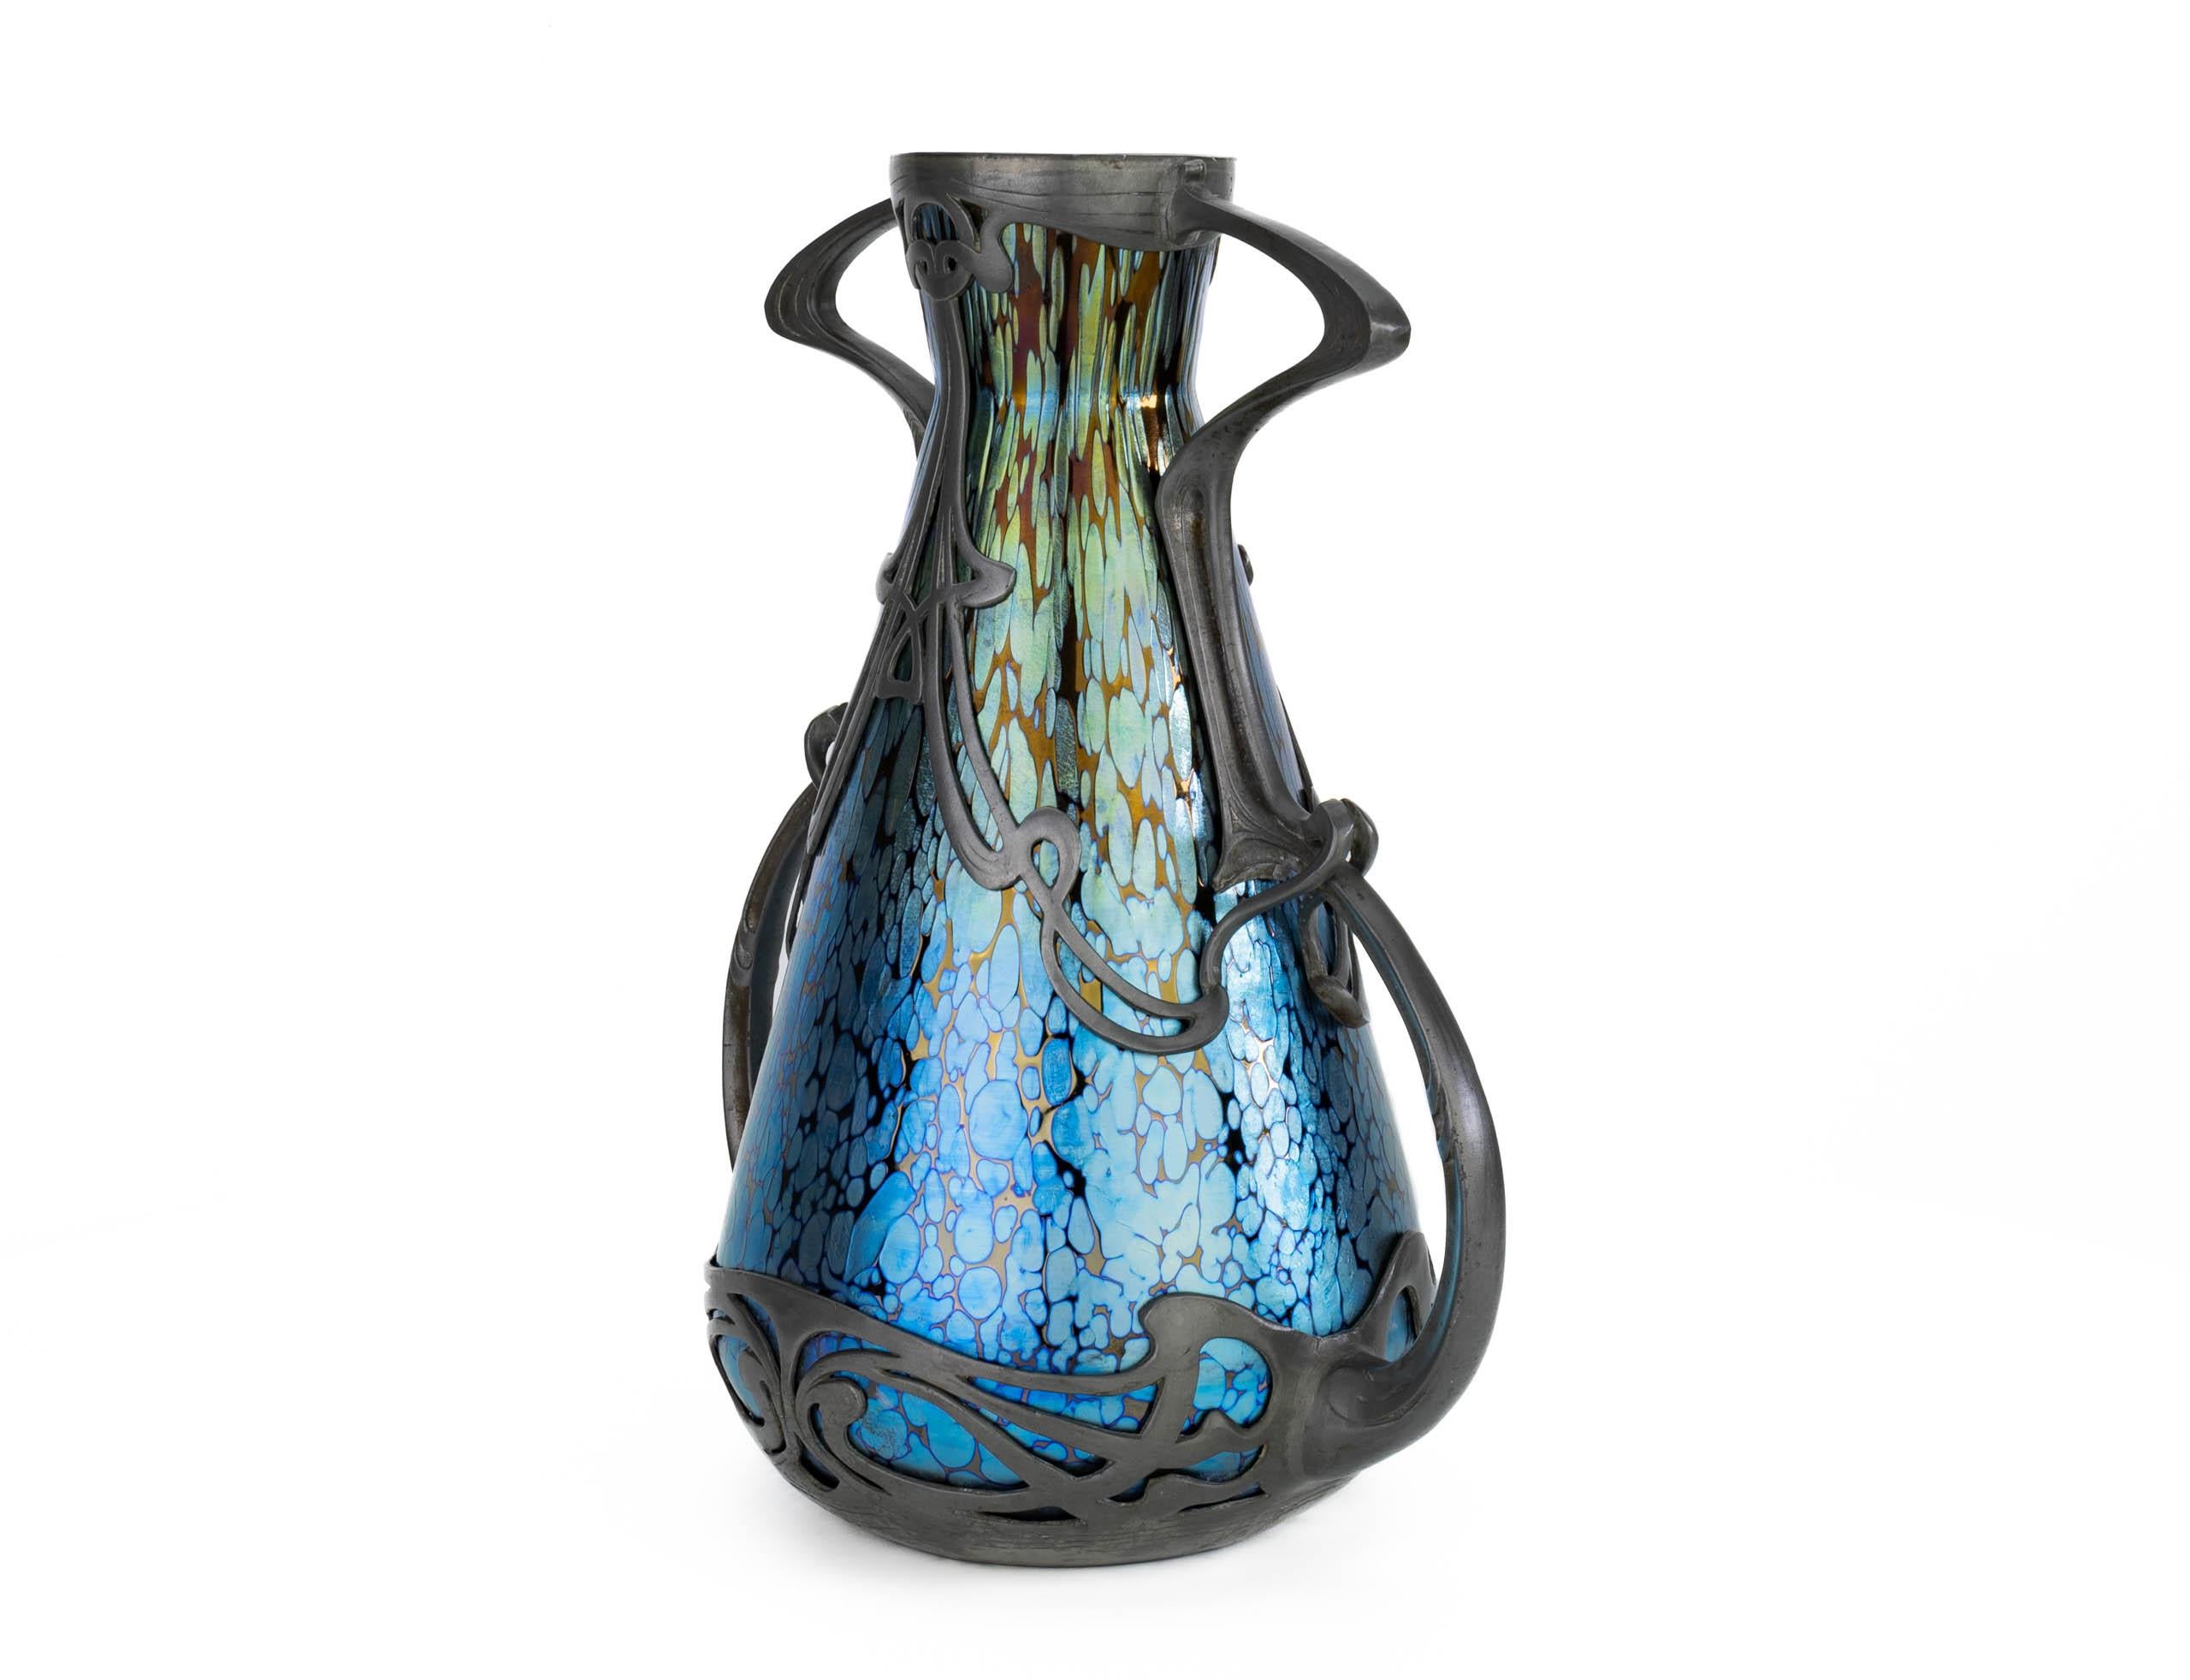 This vase was created in the heyday of Art Nouveau around 1900 – 1905 through a collaboration between Johann Loetz Witwe from Austrian Bohemia and Boudon & Klähr from Paris. This creation is a perfect marriage of Austrian Jugendstil and French Art